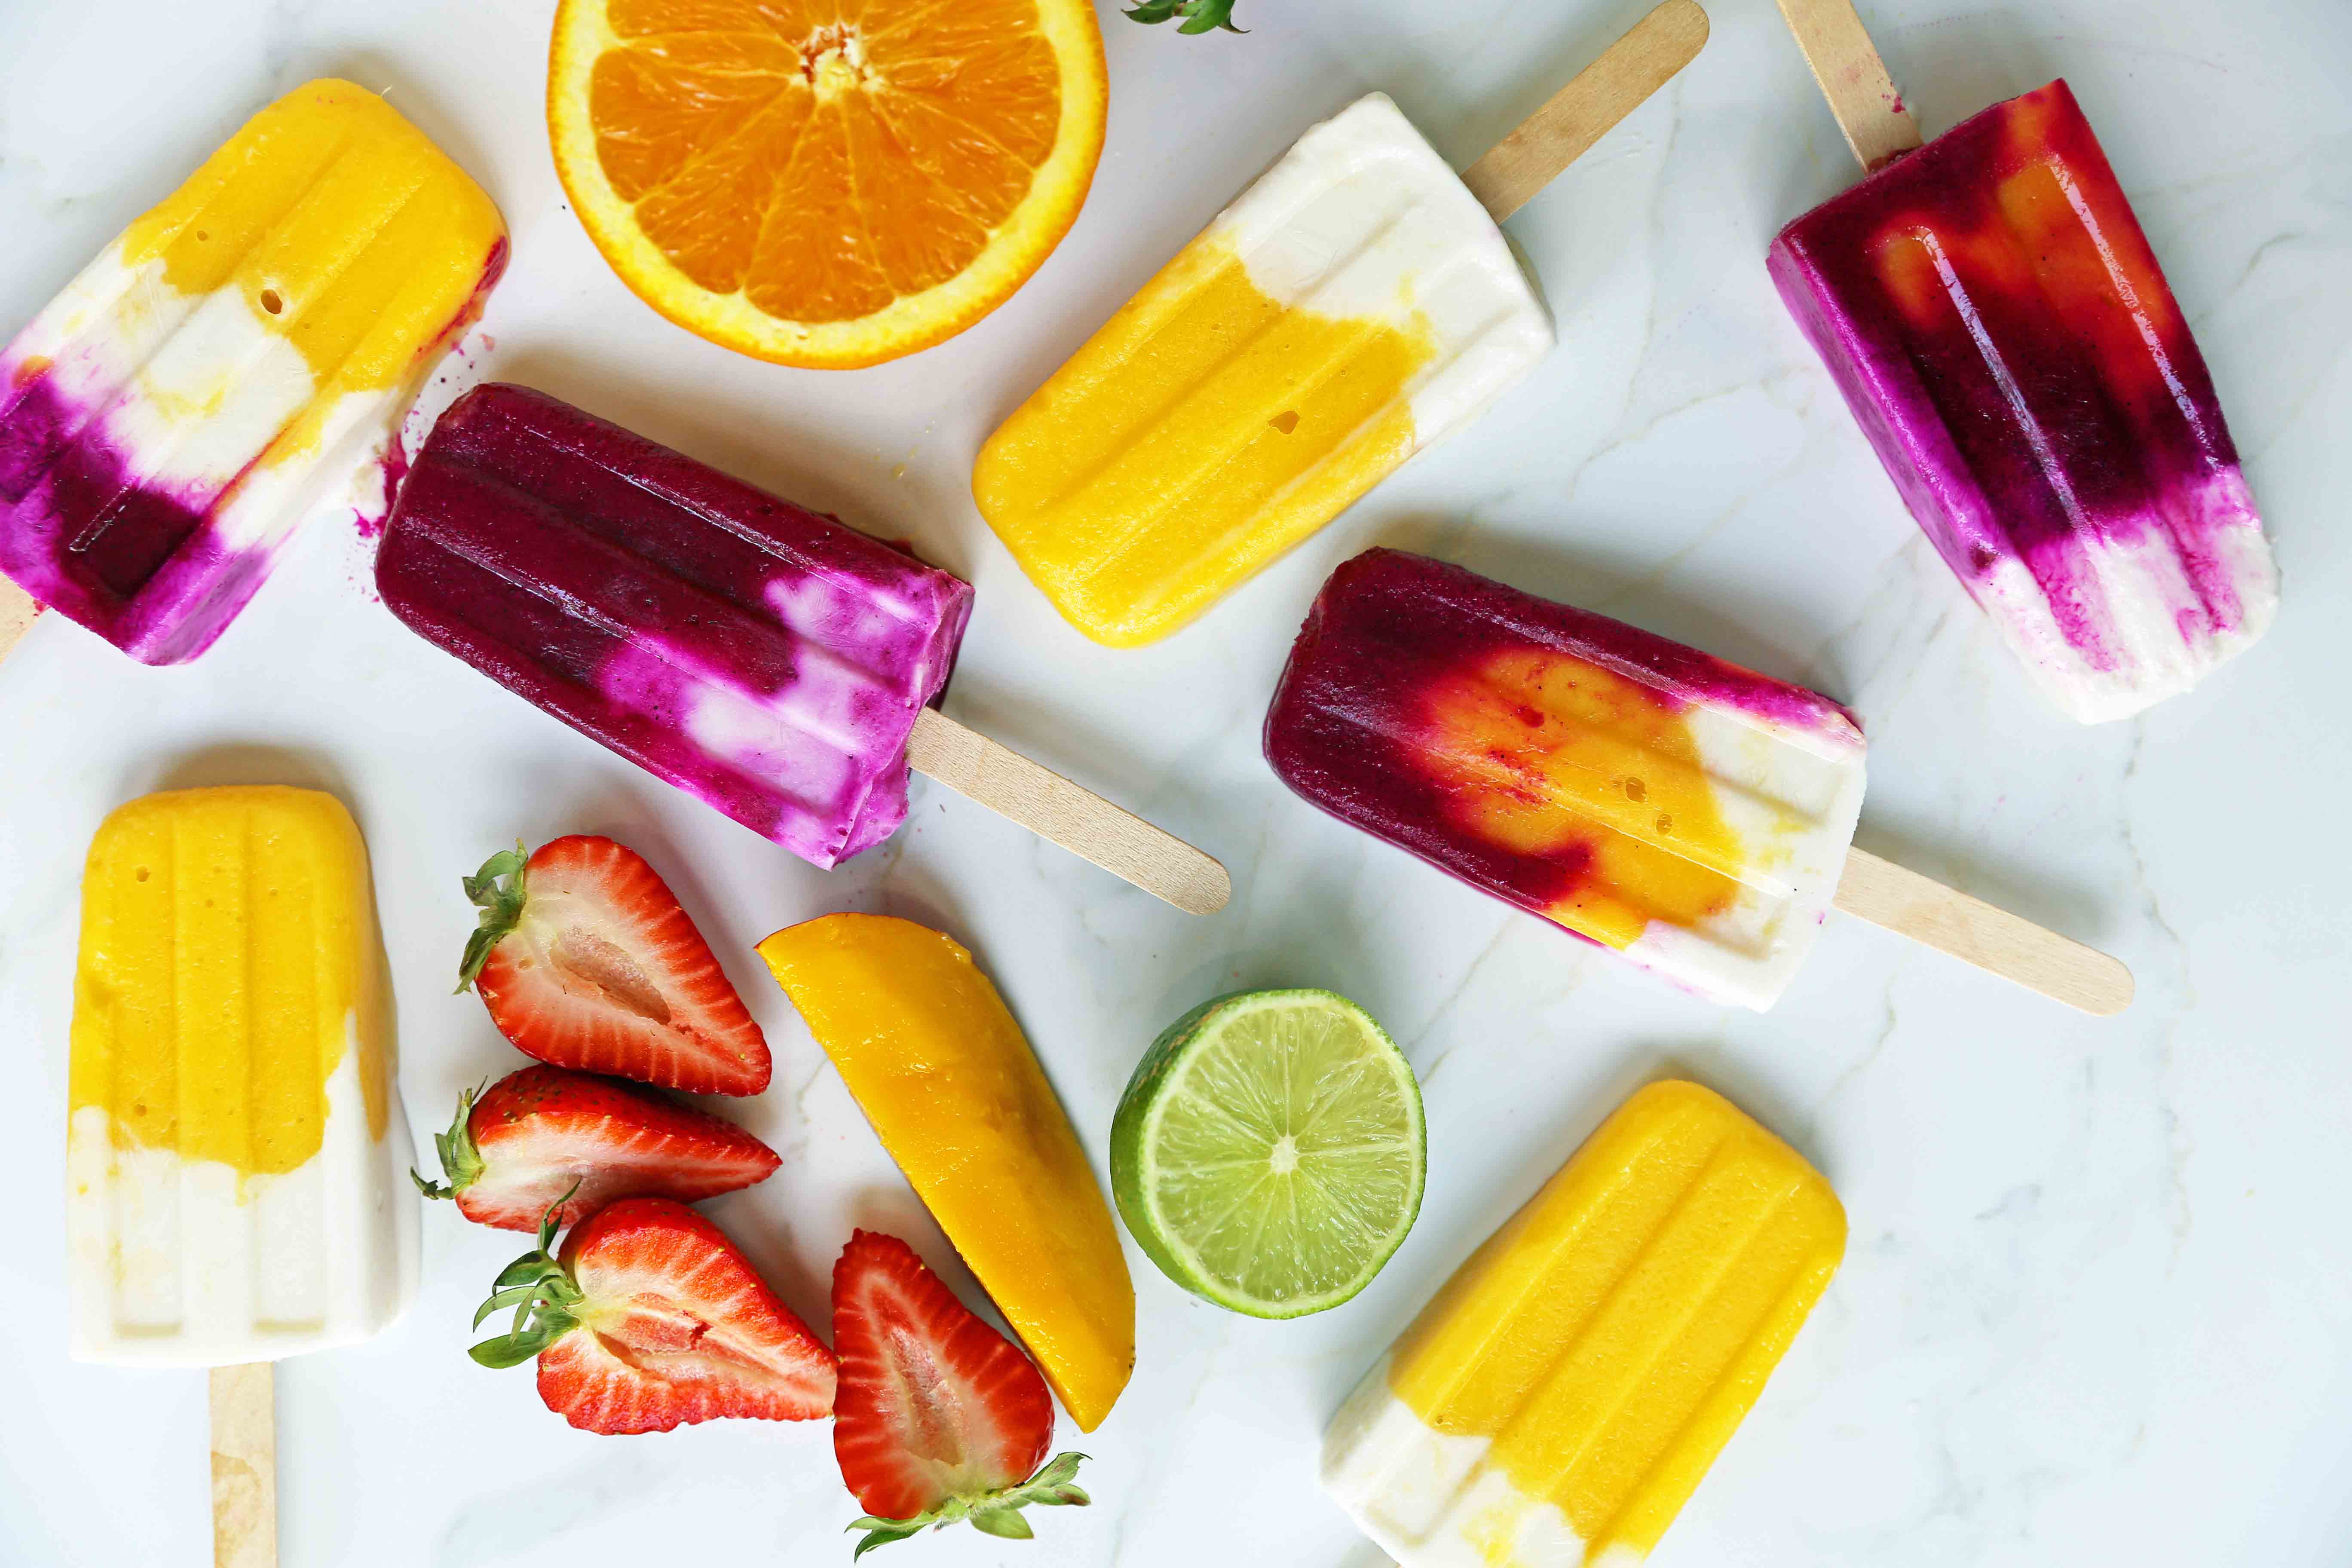 How to Make Popsicles